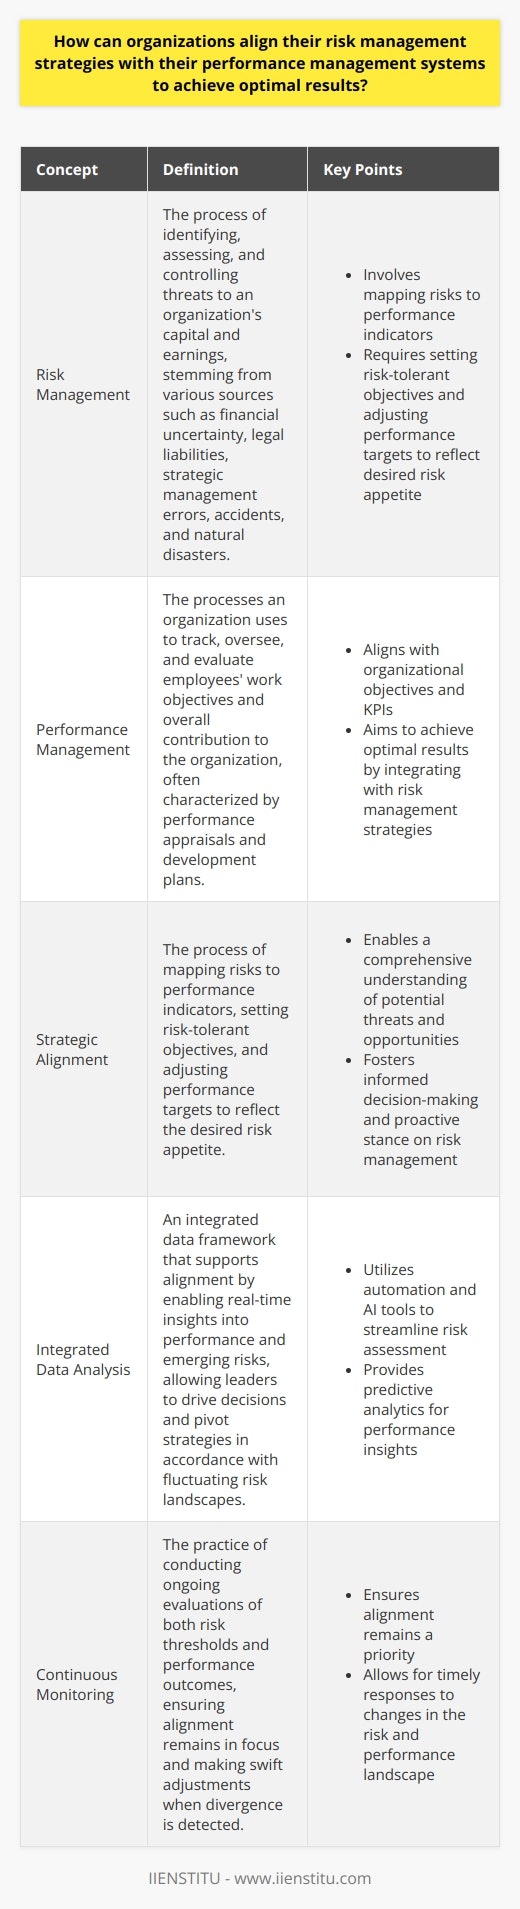 Understanding the Interplay Organizations seek to balance risk and performance. Doing so hinges on integrating risk management strategies with performance management systems. This integration enables a comprehensive understanding of potential threats and opportunities. It aligns with organizational objectives and KPIs, achieving optimal results. Risk Management and Performance Management: Definitions Risk management  involves identifying, assessing, and controlling threats to an organizations capital and earnings. These threats or risks could stem from a variety of sources. It includes financial uncertainty, legal liabilities, strategic management errors, accidents, and natural disasters. Performance management , however, refers to the processes an organization uses. They track, oversee and evaluate employees work objectives and overall contribution to the organization. It is often characterized by performance appraisals and development plans. Aligning the Two Strategic Alignment Organizations must map risks to performance indicators. Strategic alignment between risk and performance means setting risk-tolerant objectives. It also requires adjusting performance targets to reflect the desired risk appetite. Communication and Culture Clear communication plays a pivotal role. It conveys the intertwined nature of risk and performance. A culture of risk awareness fosters informed decision-making. This awareness among all employees encourages a proactive stance on risk management. Integrated Data Analysis An integrated data framework supports alignment. It enables real-time insights into performance and emerging risks. Leaders use data to drive decisions. They pivot strategies in accordance with fluctuating risk landscapes. Continuous Monitoring Regular monitoring ensures alignment remains in focus. Organizations must conduct ongoing evaluations of both risk thresholds and performance outcomes. Adjustments occur swiftly when divergence is detected. The Role of Technology Innovative technologies enhance alignment efforts. Automation and AI tools streamline risk assessment. They provide predictive analytics for performance insights. Key Steps for Successful Integration - Define clear objectives that acknowledge risk and performance goals. - Establish a risk-aware culture across the organization. - Deploy integrated risk and performance management software. - Promote open communication about risks and performance expectations. - Regularly review and update risk management and performance strategies. Conclusion Organizations striving for optimal results must weave risk management strategies with performance systems. Alignment of these facets demands strategy, communication, and technology. It also requires an adaptive mindset prepared to respond to an ever-changing risk and performance landscape.